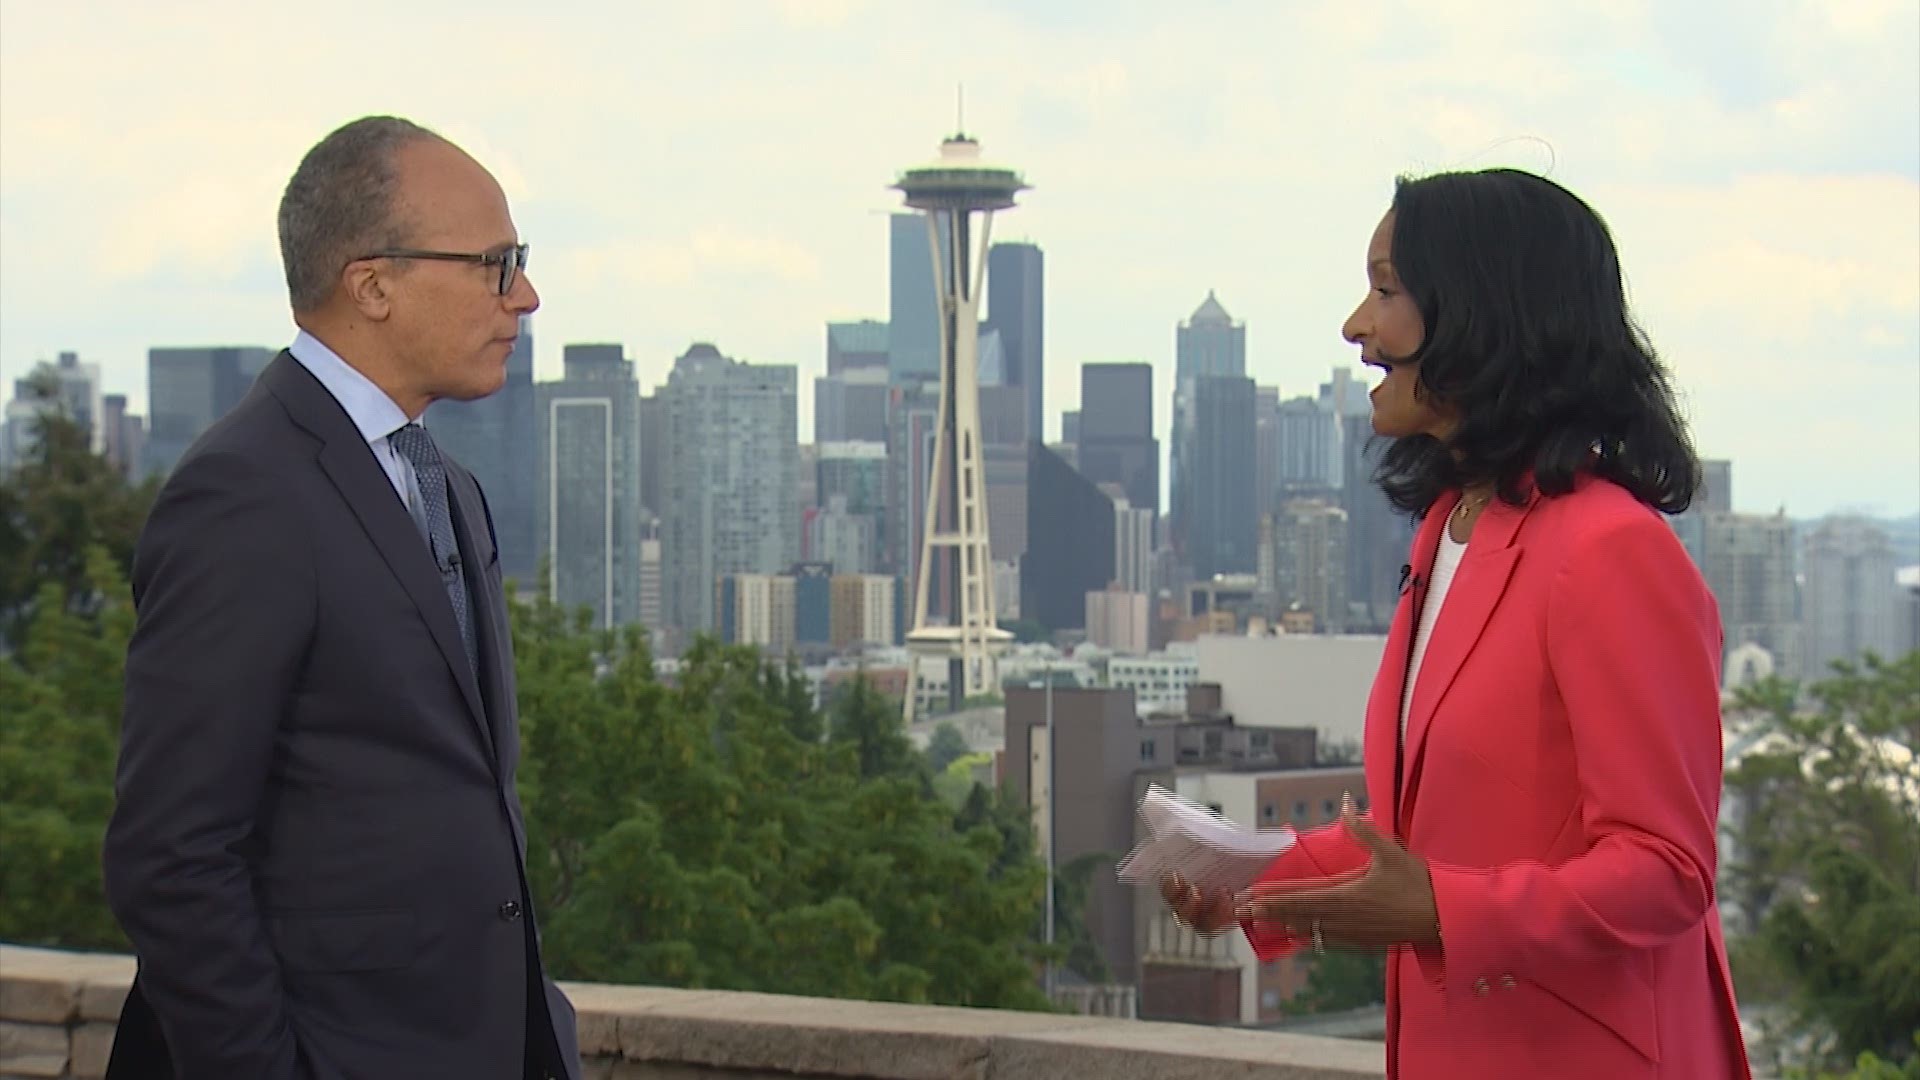 NBC Nightly News Anchor Lester Holt talks with KING 5's Joyce Taylor during his visit to Seattle to discuss covering the pandemic and racial justice in America.